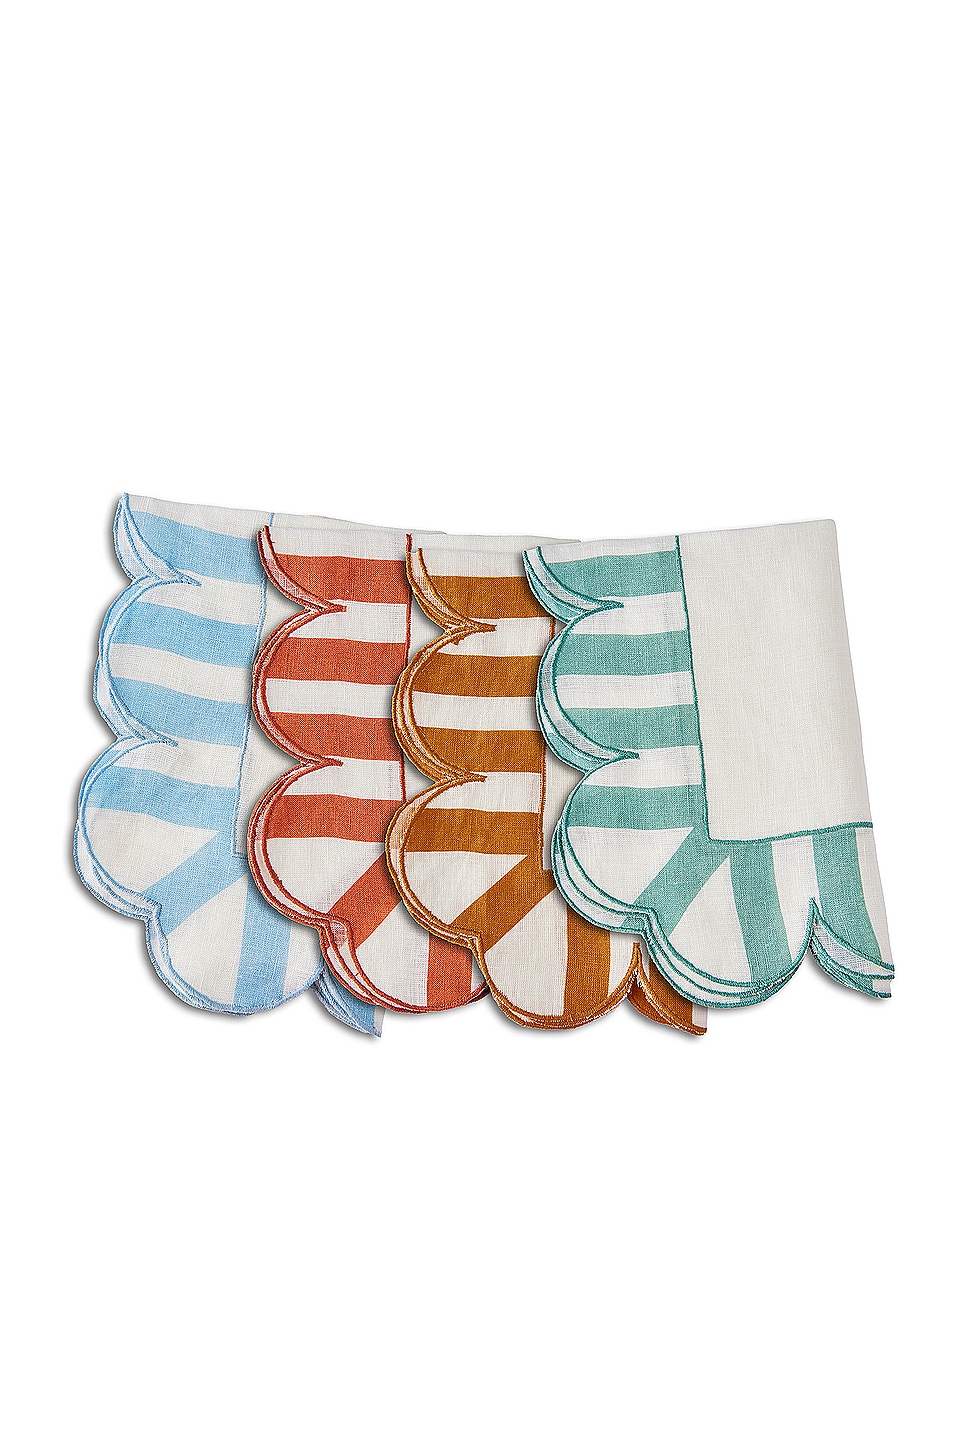 Image 1 of Misette Embroidered Linen Scalloped Stripe Napkins Set Of 4 in Natural & Multicolor